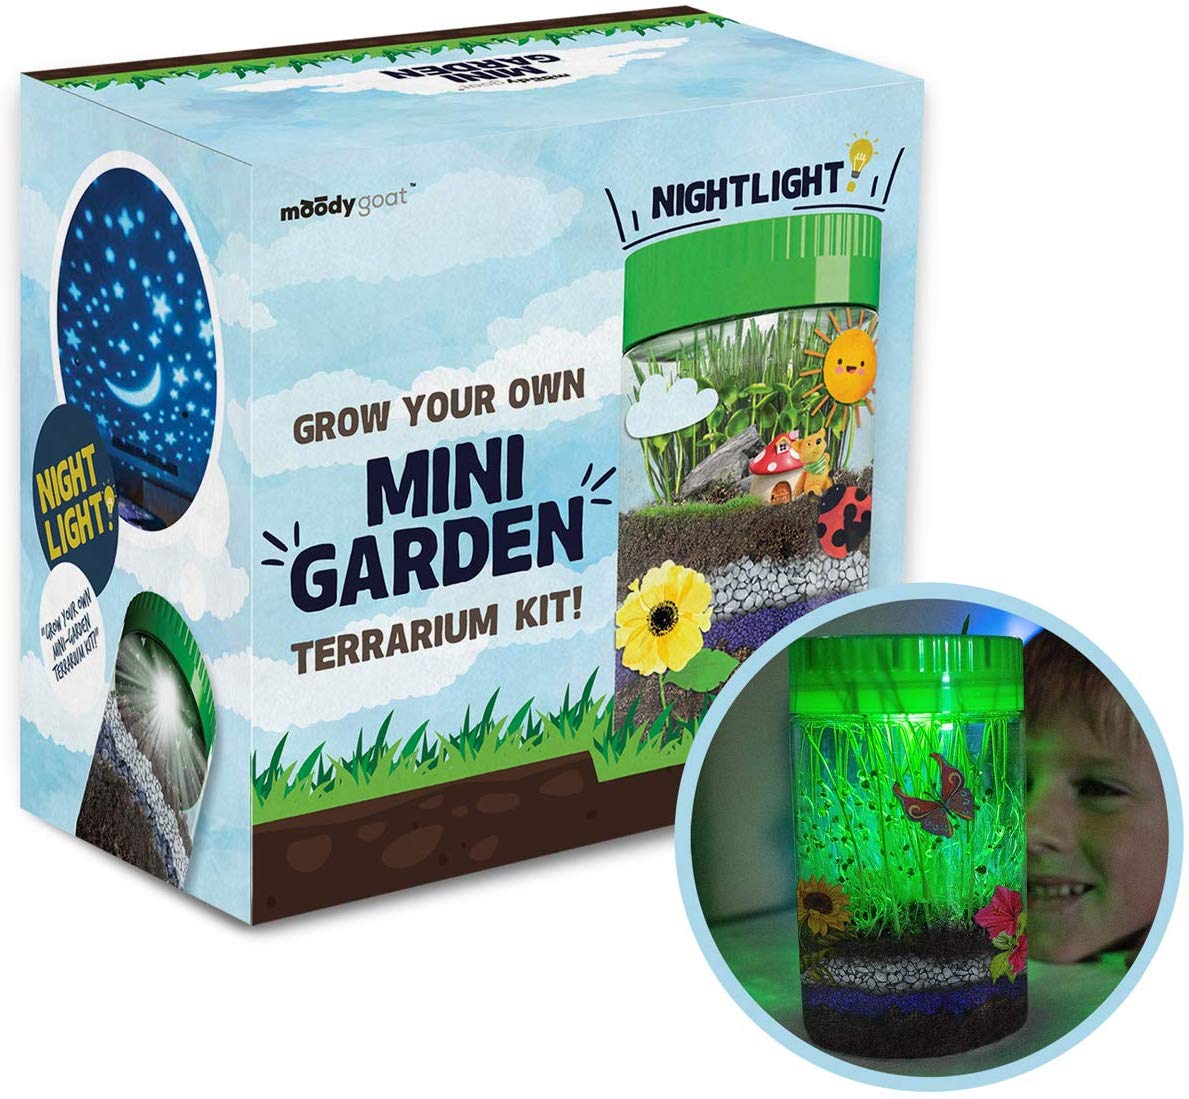 Moody Goat Terrarium Kit - Top Toys and Gifts for Six Year Old Boys 1